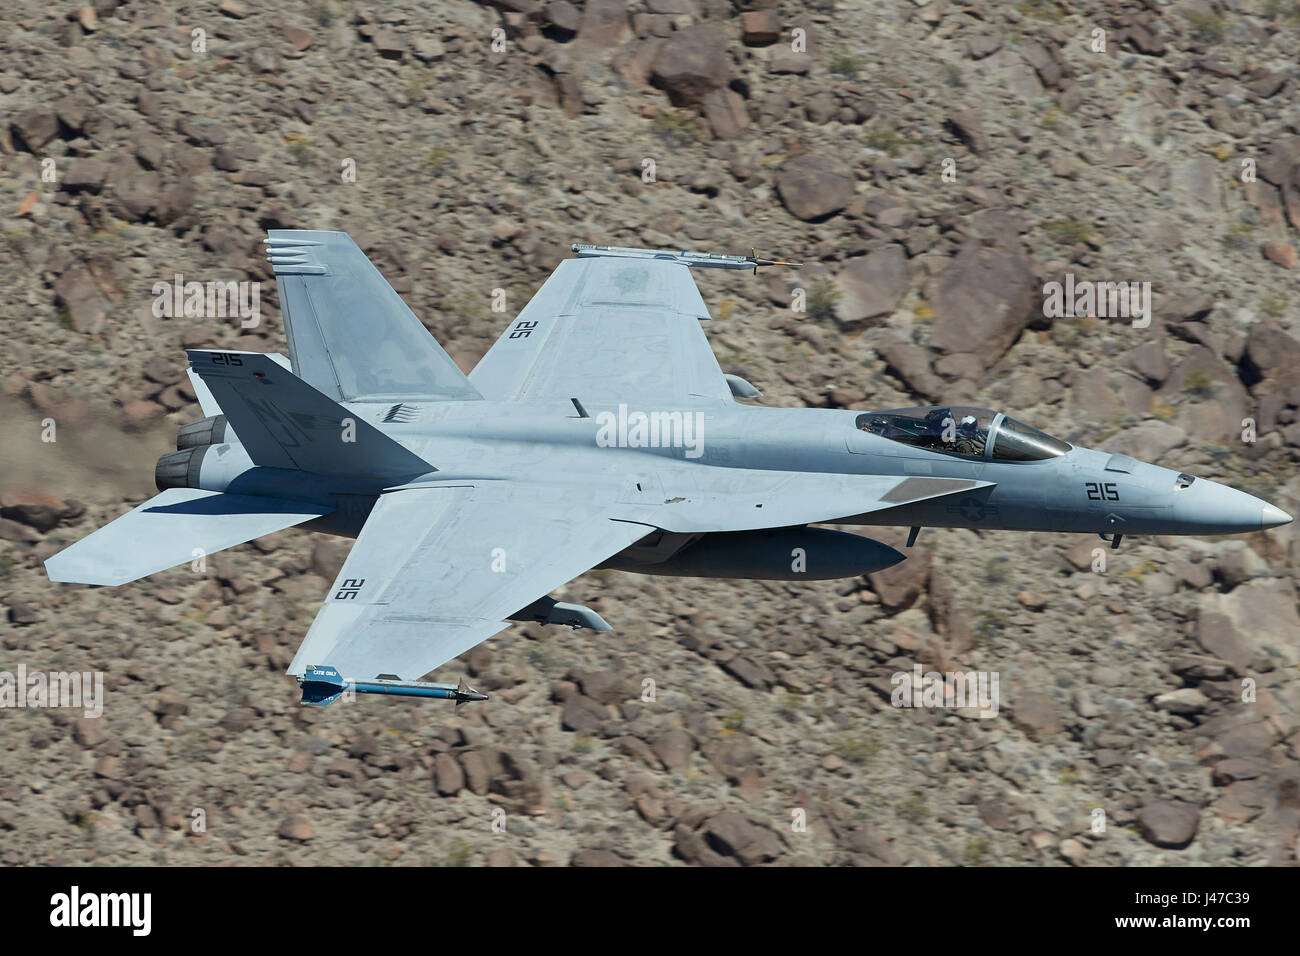 United States Navy F/A-18E, Super Hornet, Single Seat Jet Fighter, Flying At High Speed And Low Level Through A Desert Canyon. Stock Photo